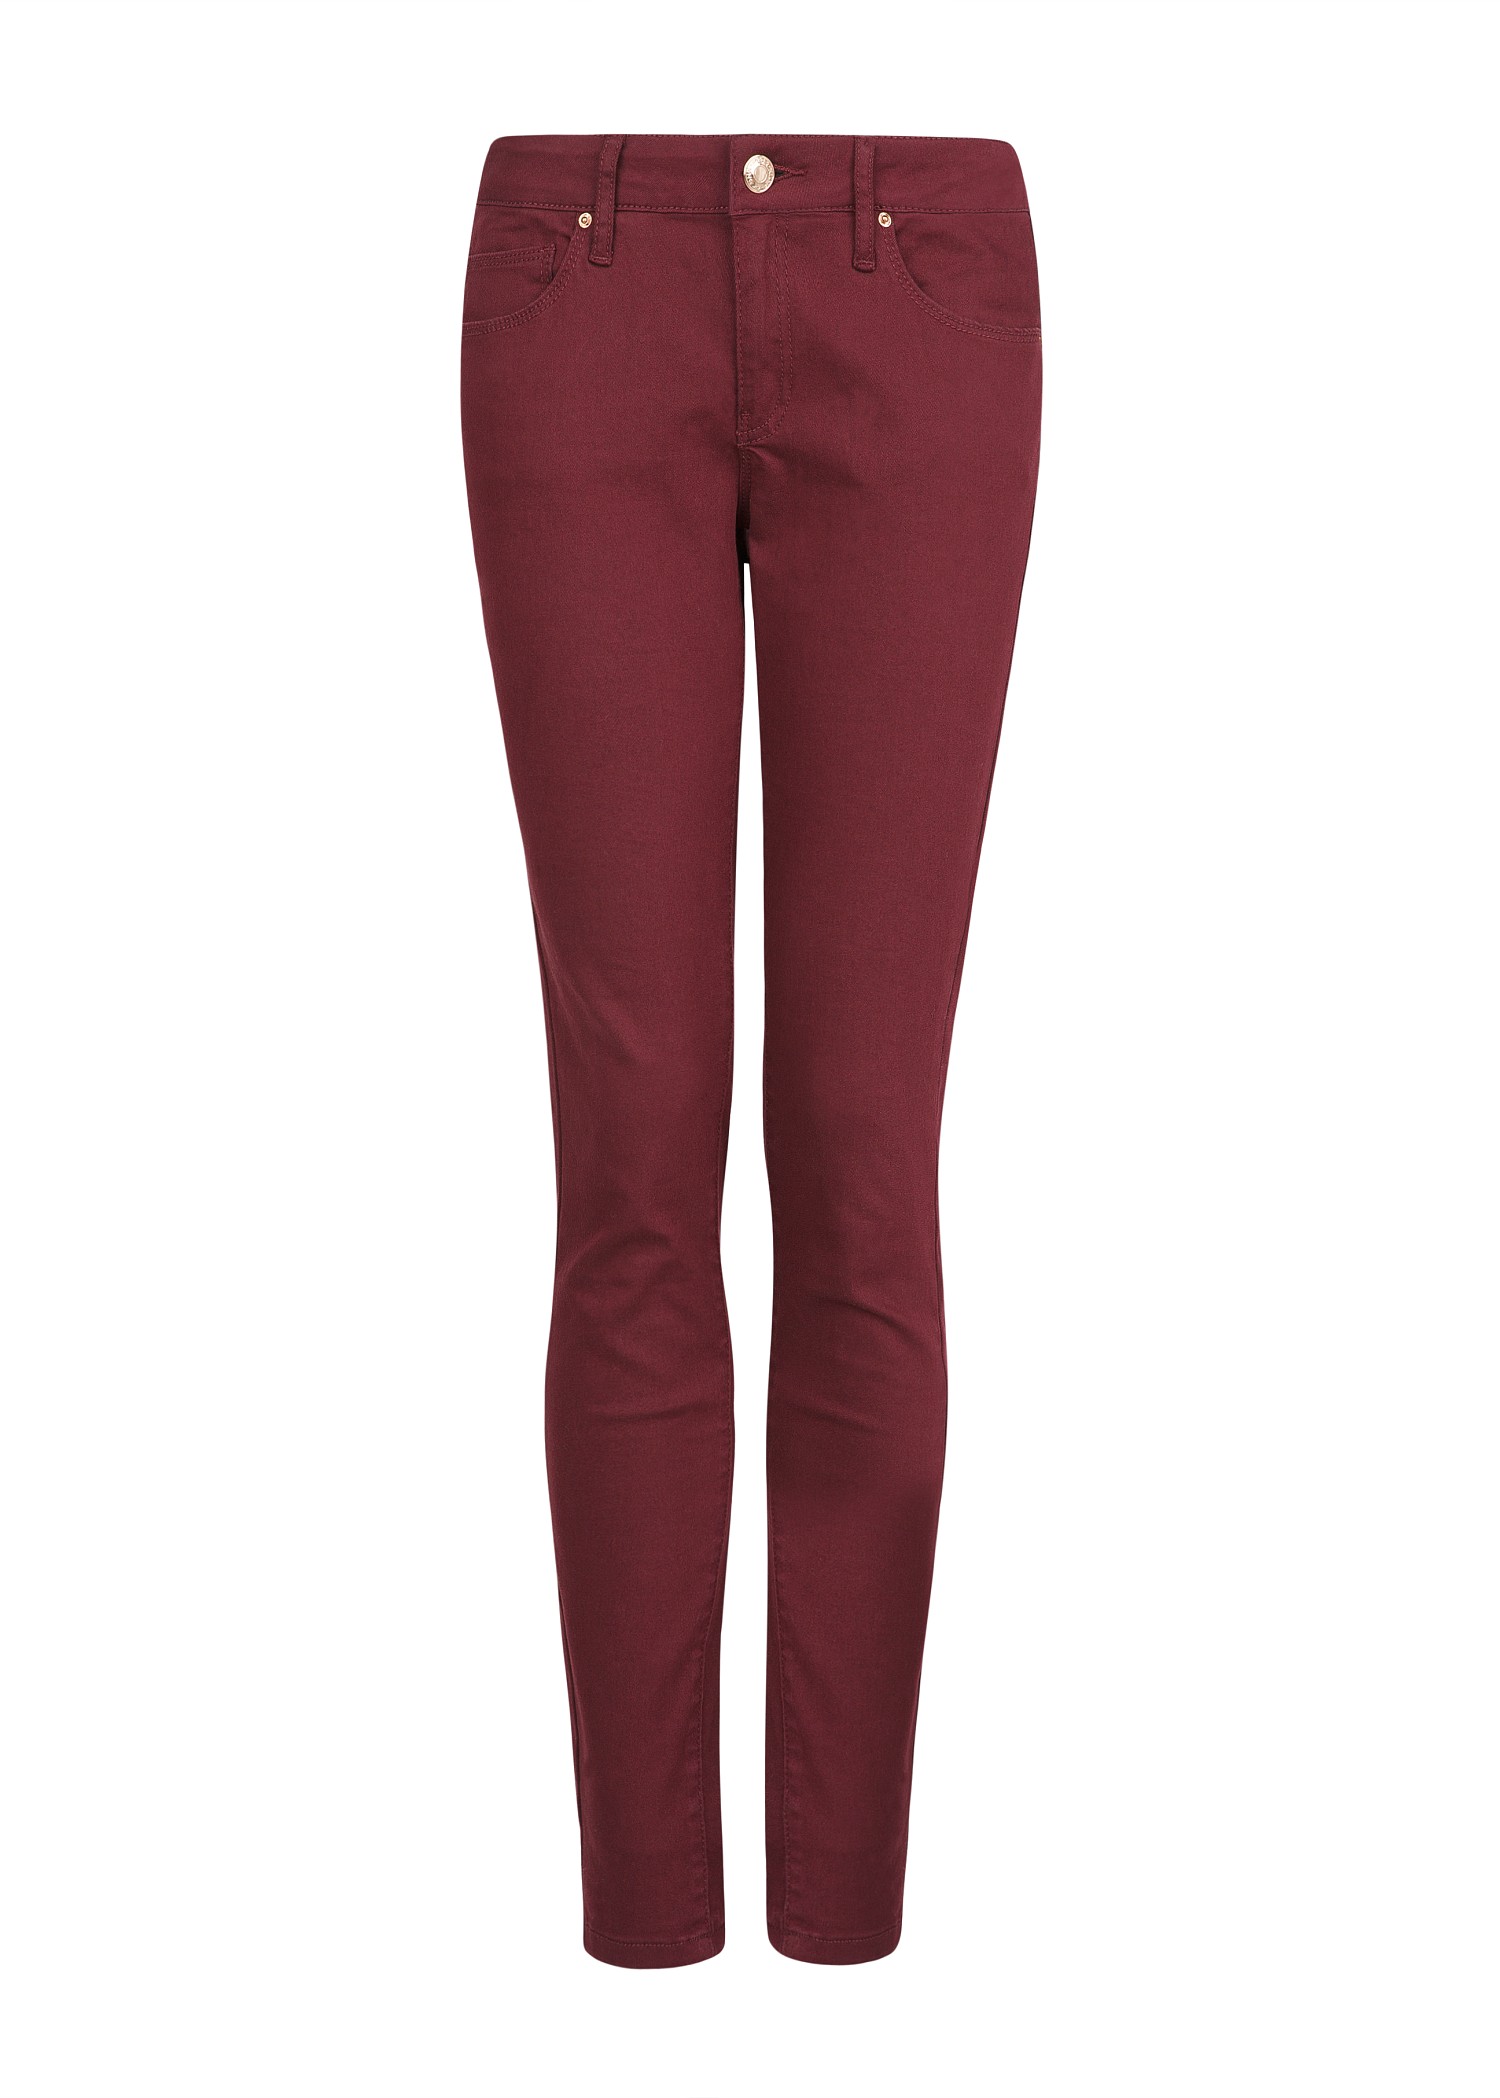 Mango Burgundy Coated Superslim Jeans in Red | Lyst